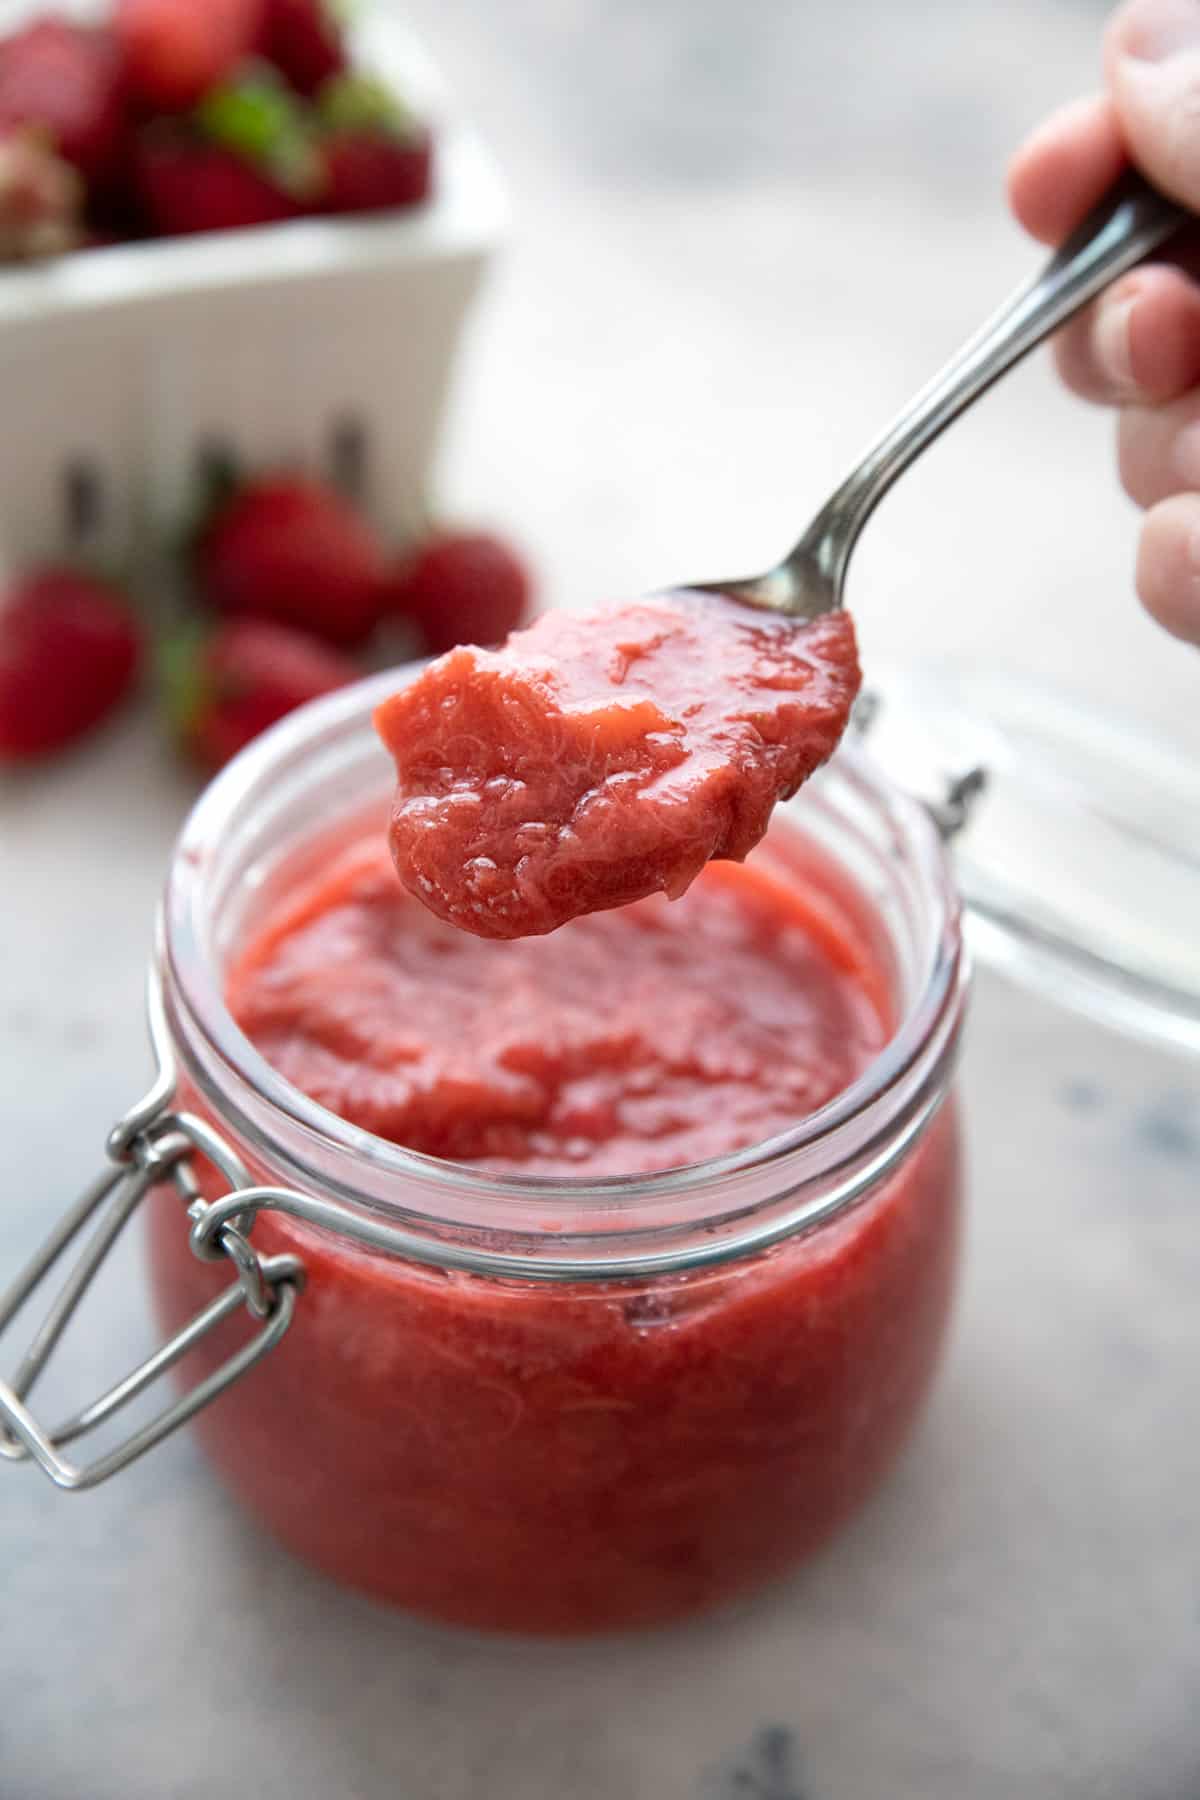 A spoon digging into a jar of strawberry rhubarb sauce.